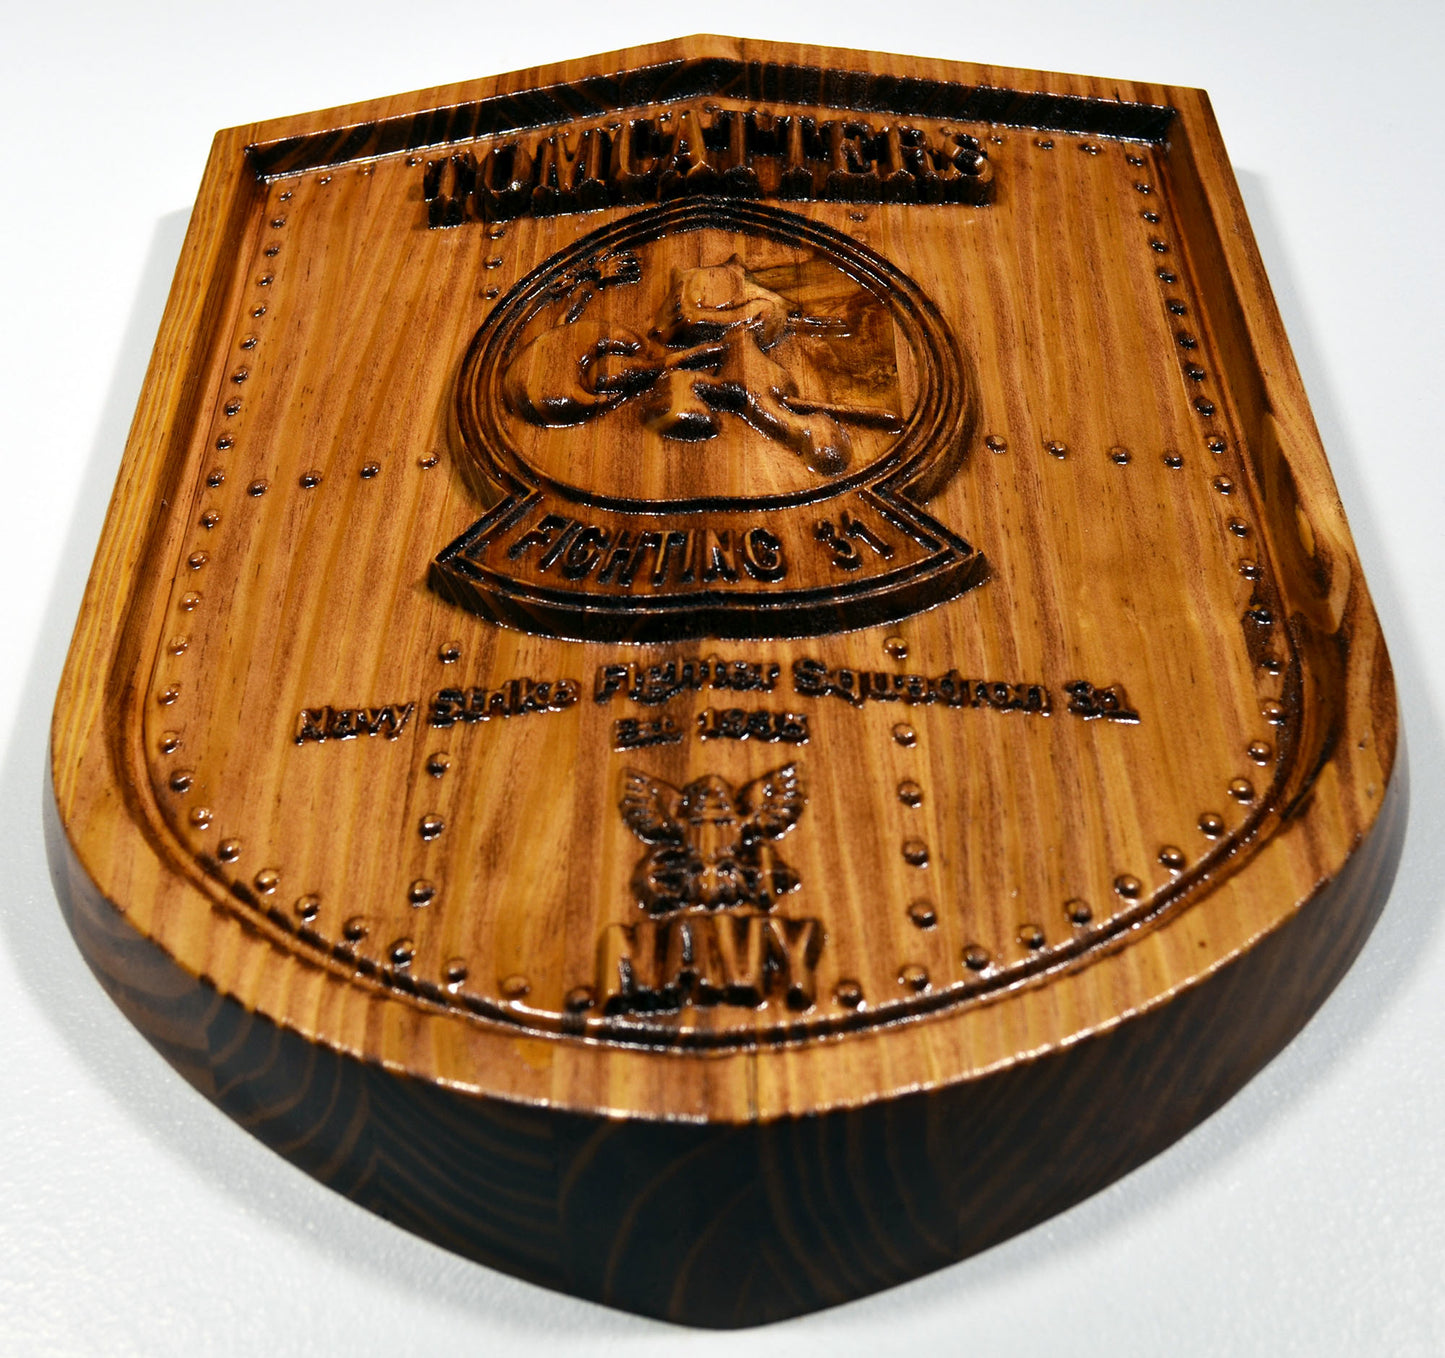 NAVY VFA-31, Navy Strike Fighter Squadron 31, 3d wood carving, military plaque